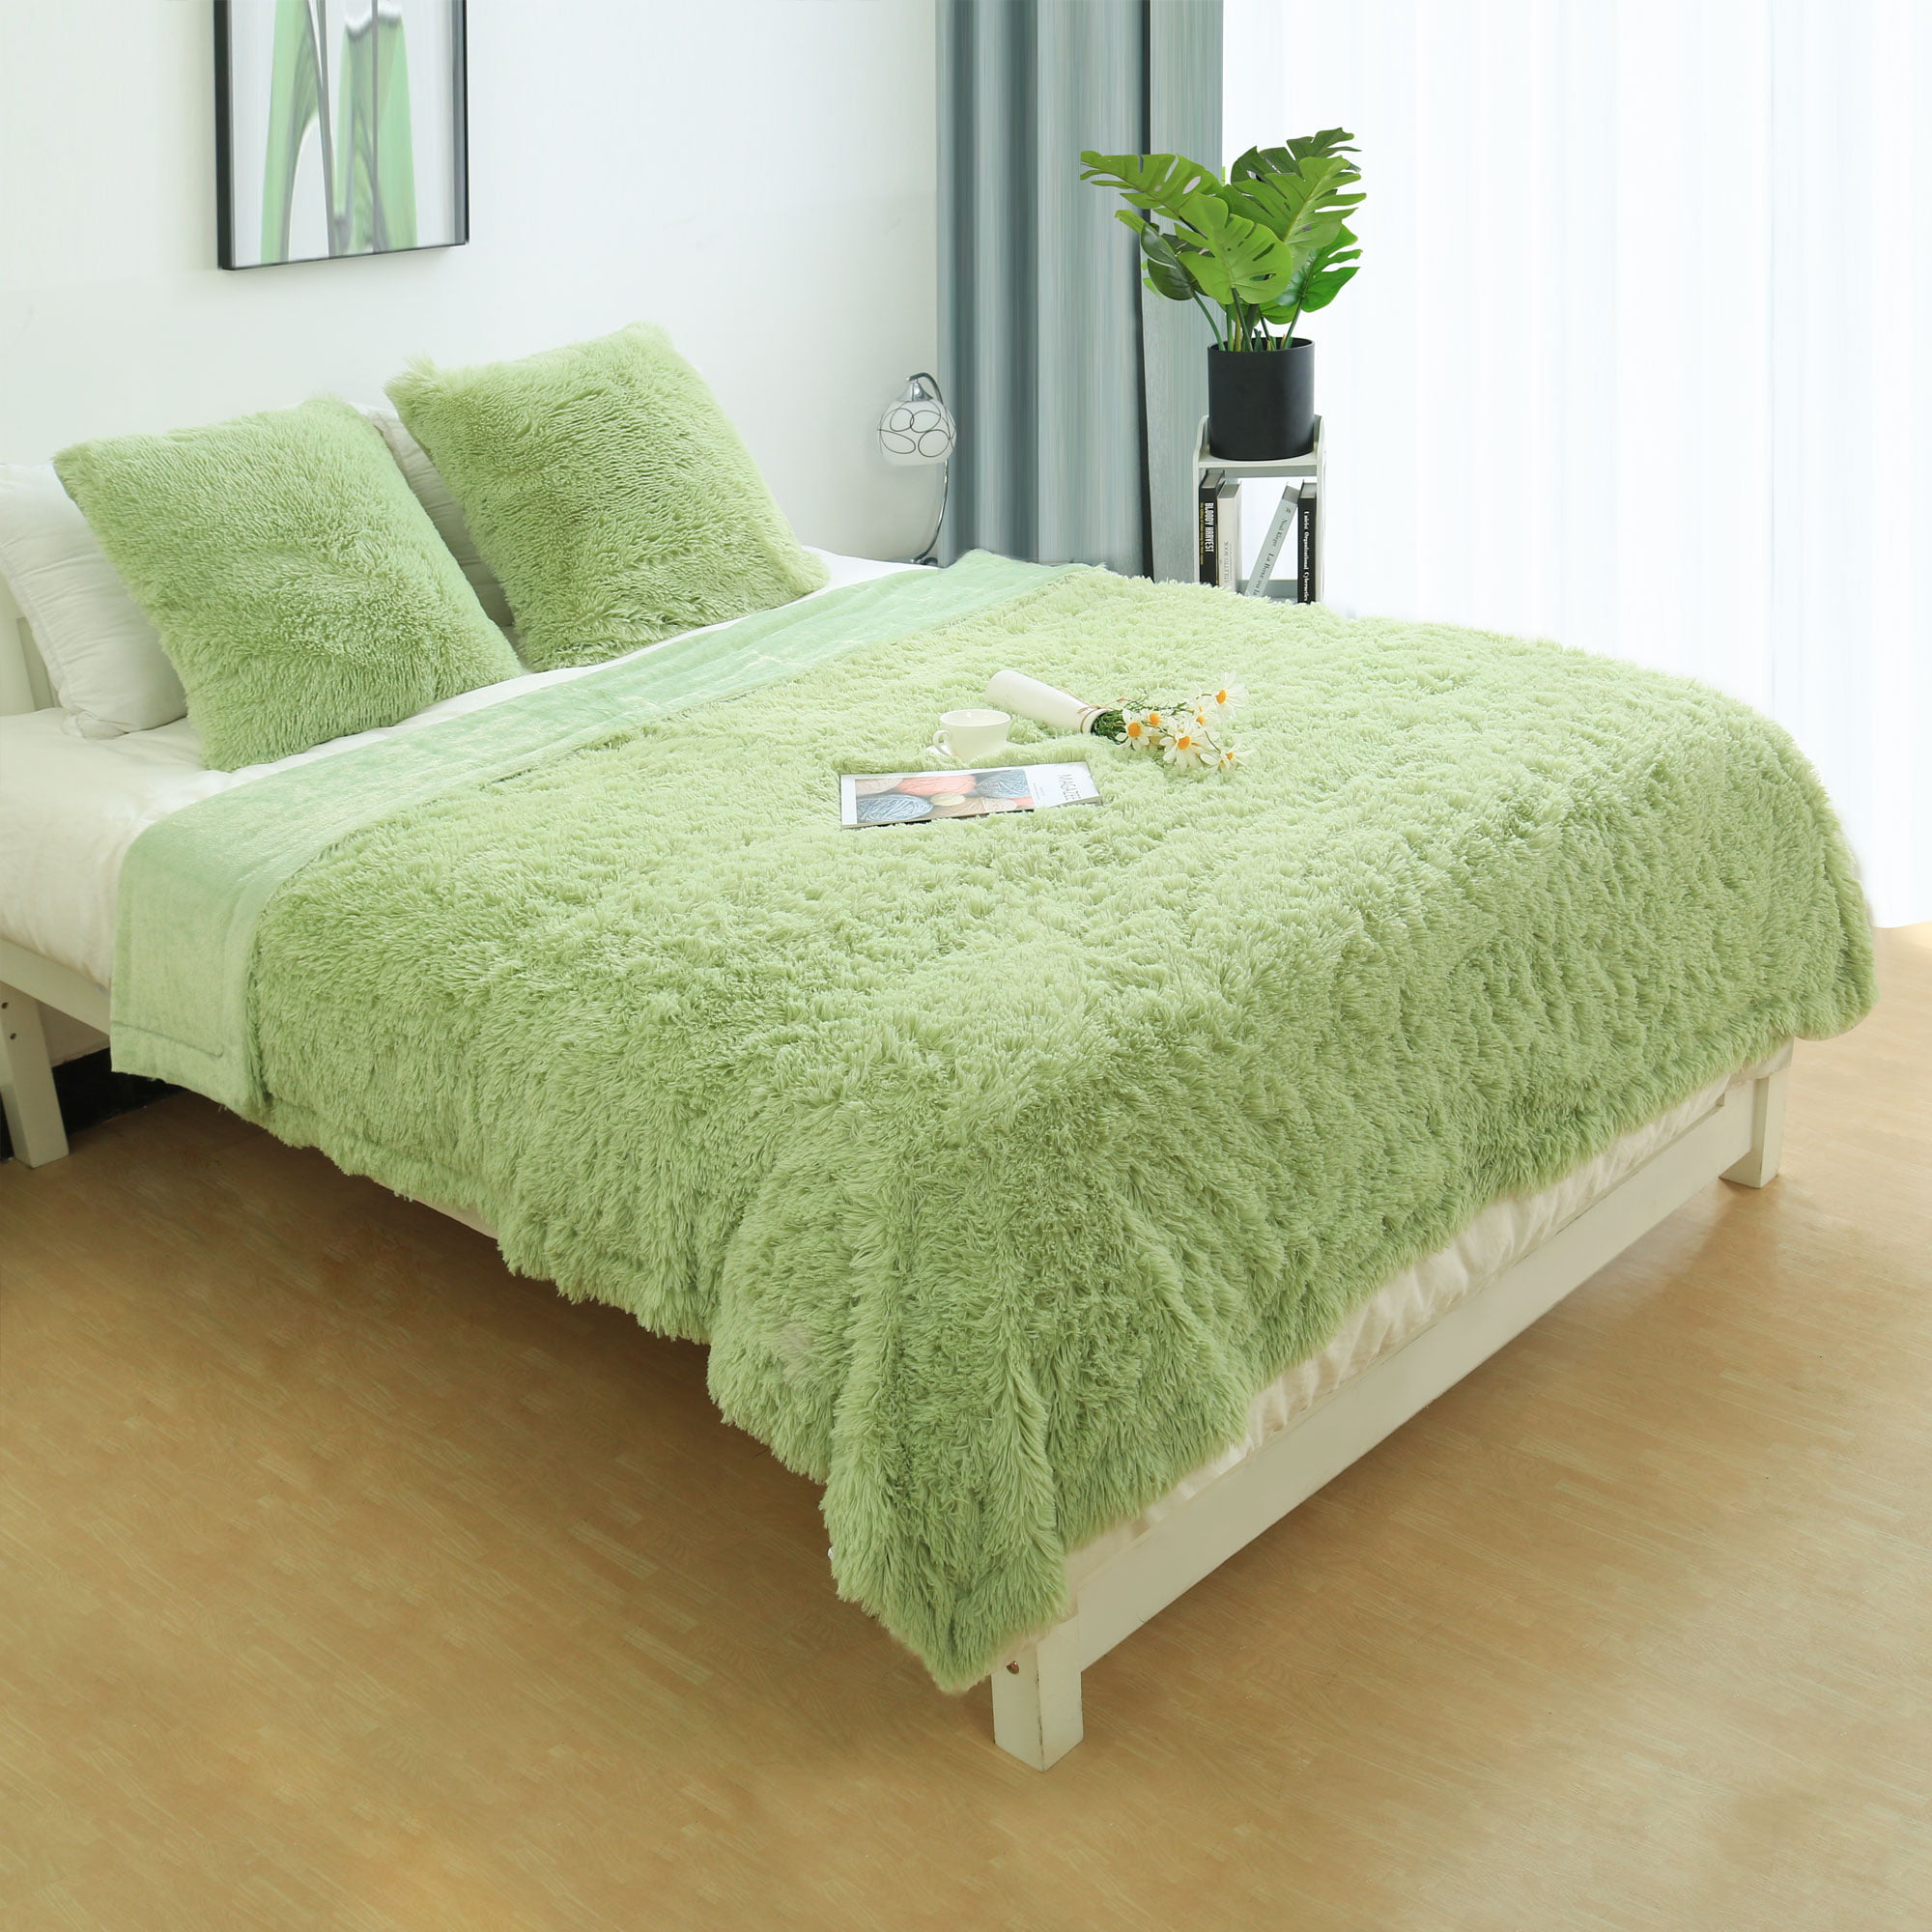 Details about   Faux Fur Fluffy Long PlushThrow Blanket Bed Sofa Bedspread Shaggy Bedding Sheet 